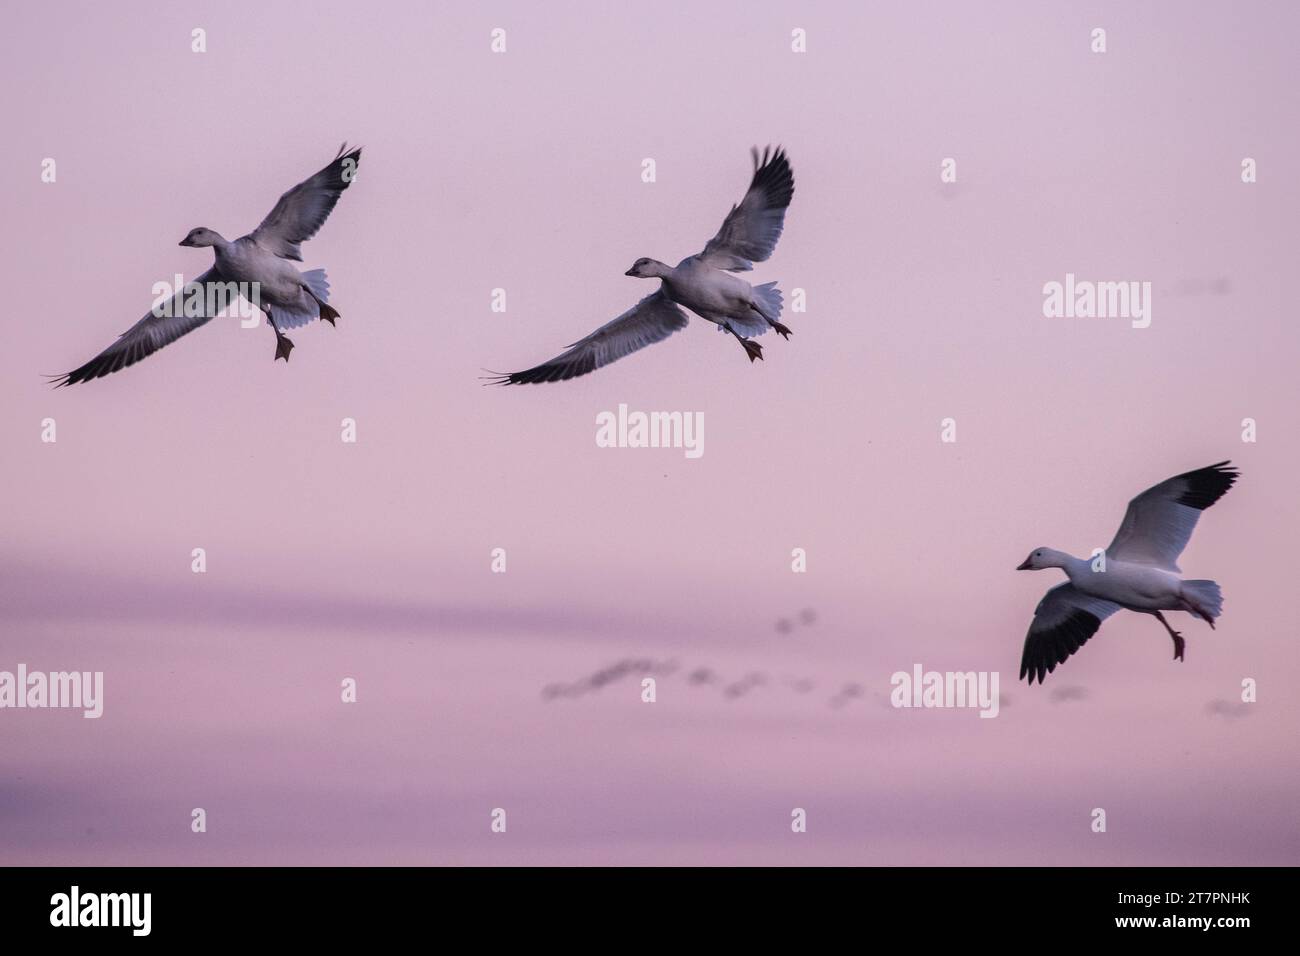 Snow geese (Anser caerulescens), this goose species visits Sacramento Wildlife refuge in California in huge numbers during their winter migration. Stock Photo